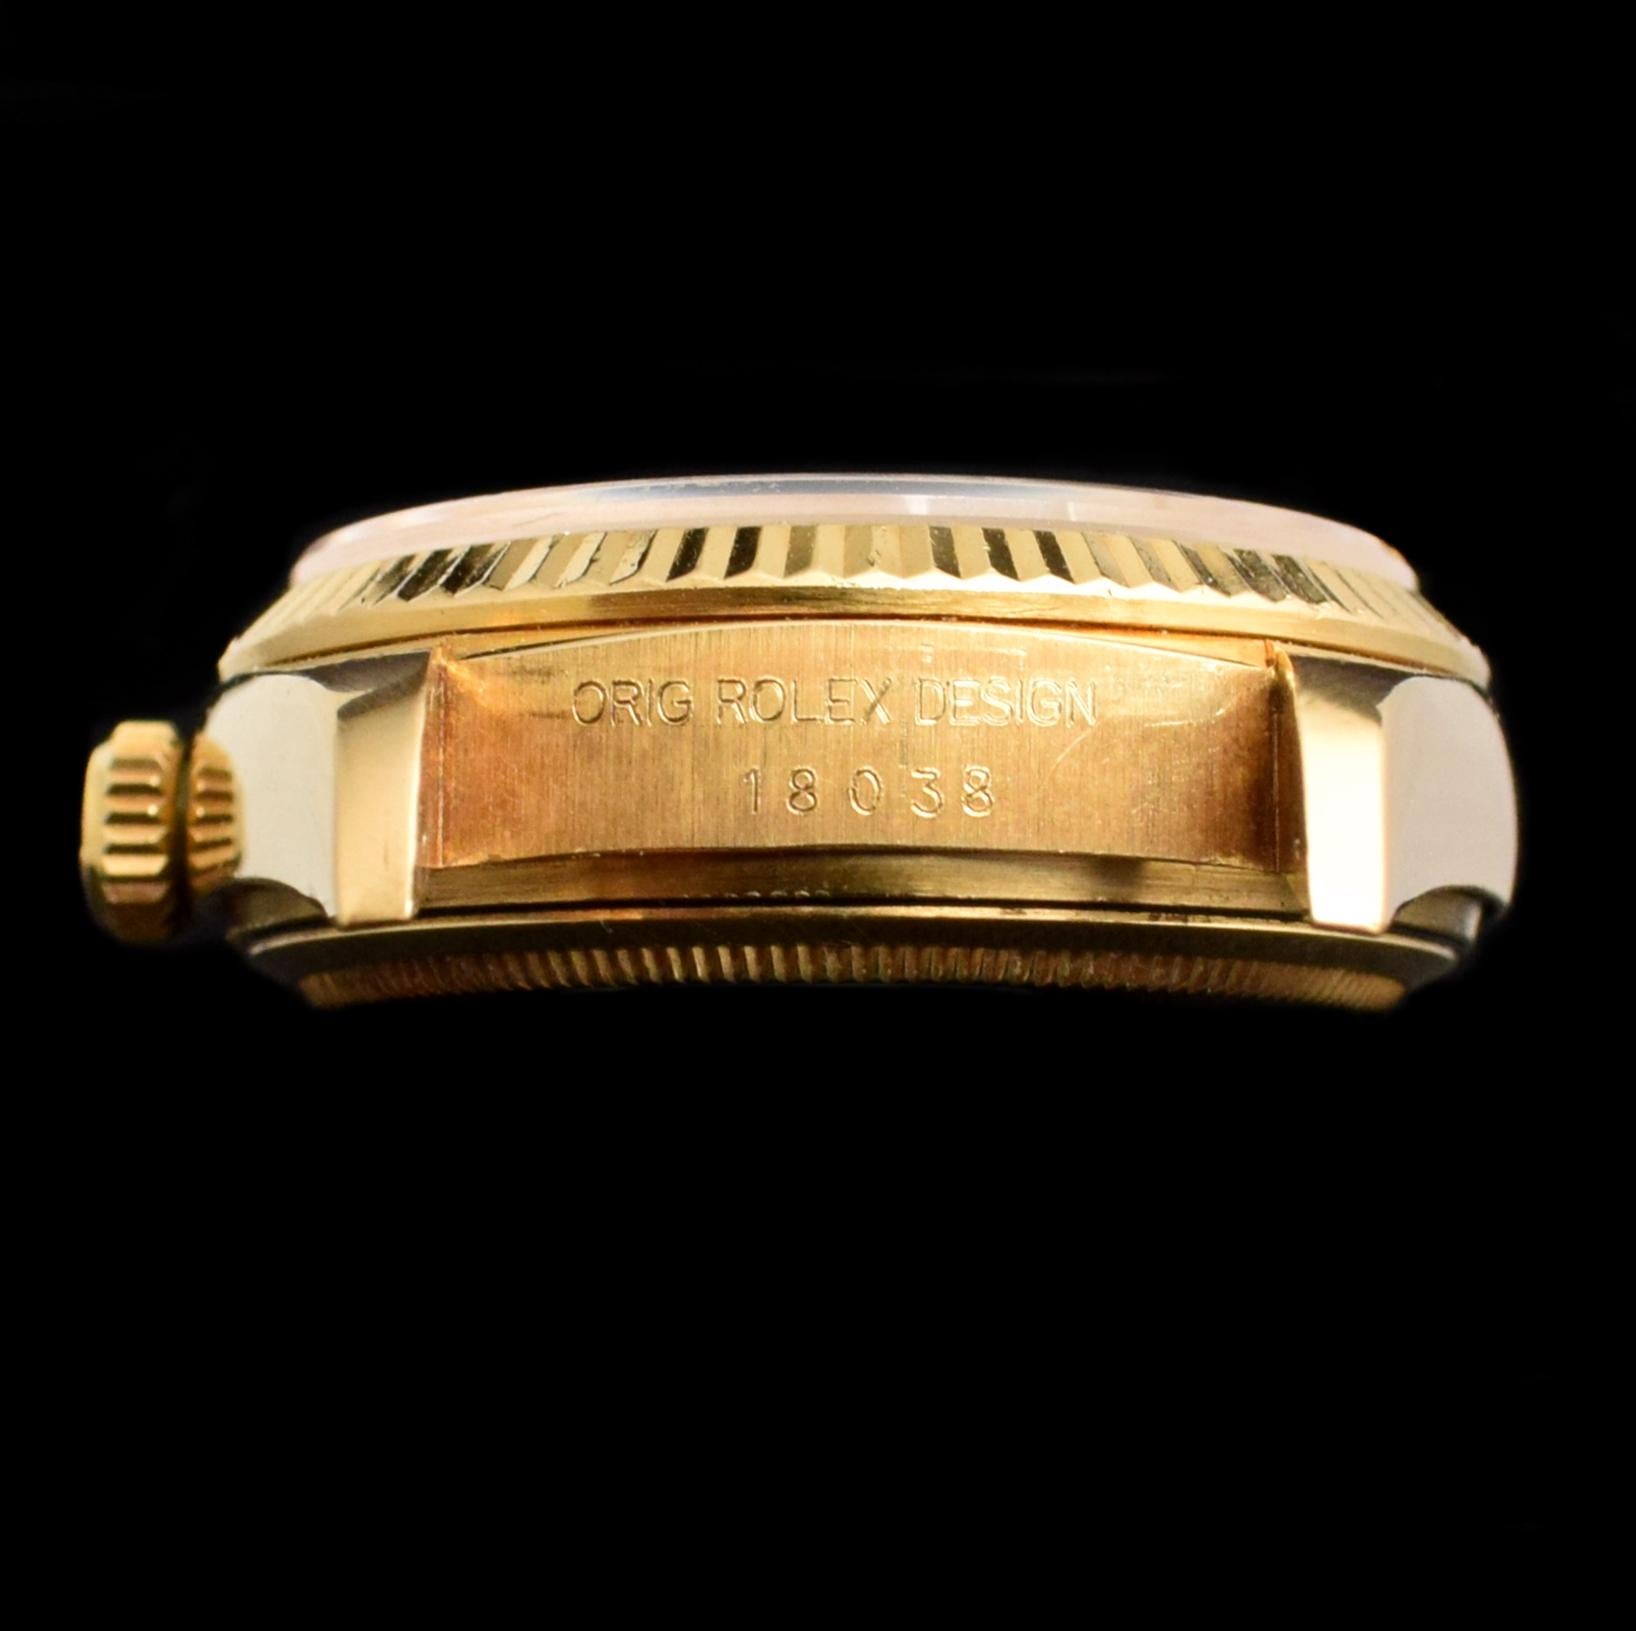 Square Cut Rolex Day-Date 18K Yellow Gold Champagne Dial Diamond Indexes 18038 Watch 1985